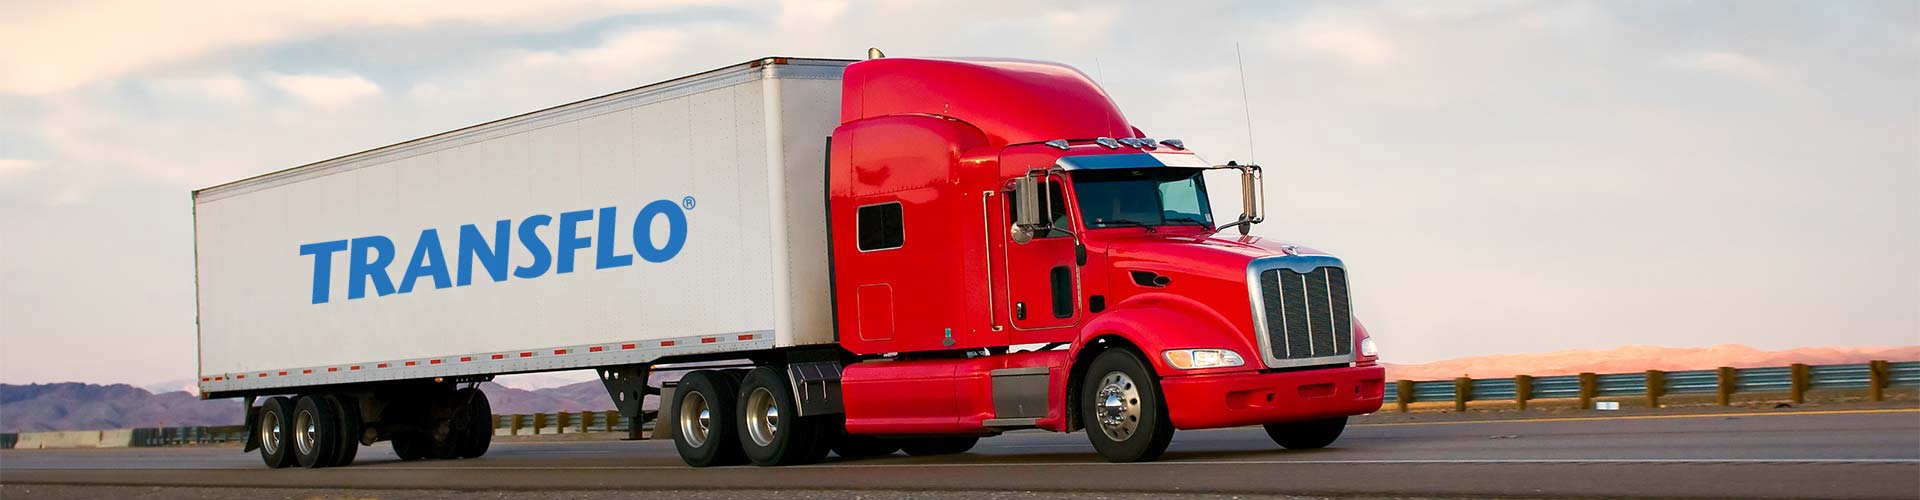 ELD and HOS Trucking Software Solutions | Transflo